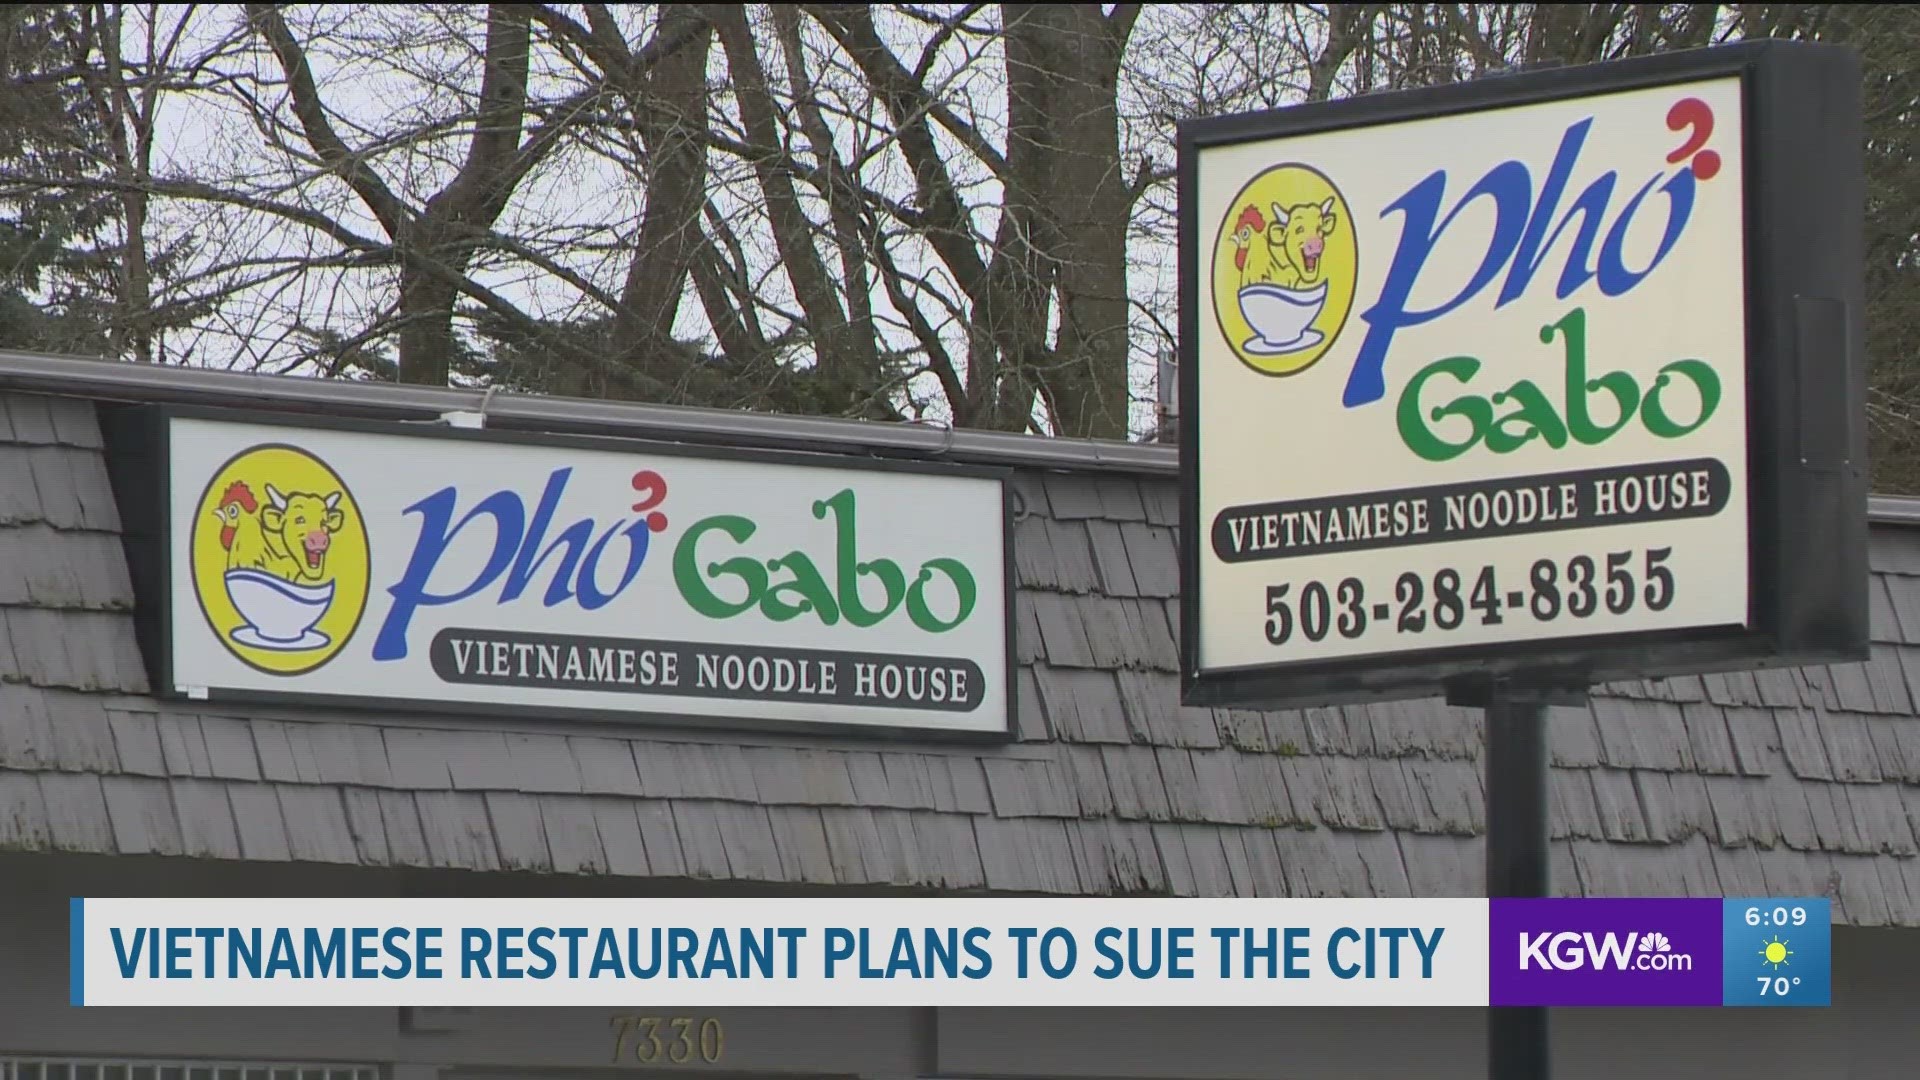 The owner of Pho Gabo accuses the city of Portland of discrimination after he was forced to close his restaurant due to anonymous complaints from the same person.